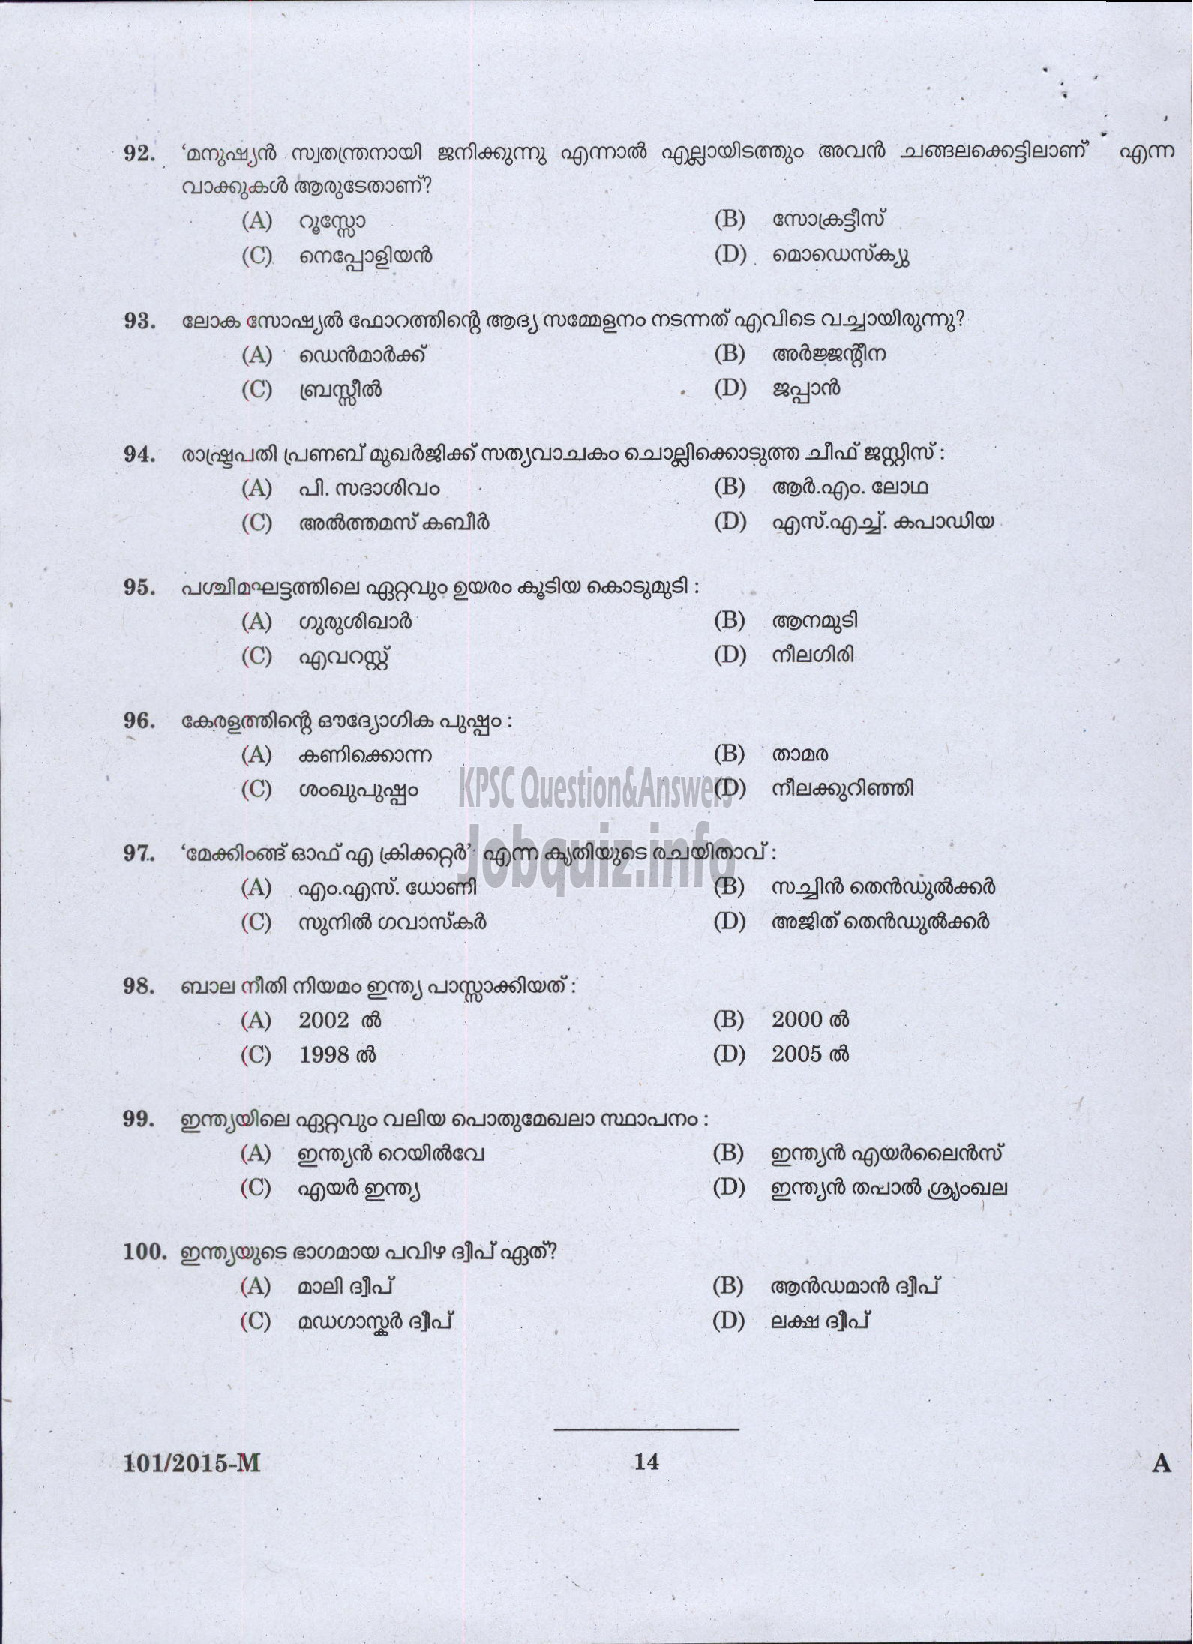 Kerala PSC Question Paper - FIREMAN DRIVER CUM PUMP OPERATOR TRAINEE FIRE AND RESCUE SERVICES ( Malayalam ) -12